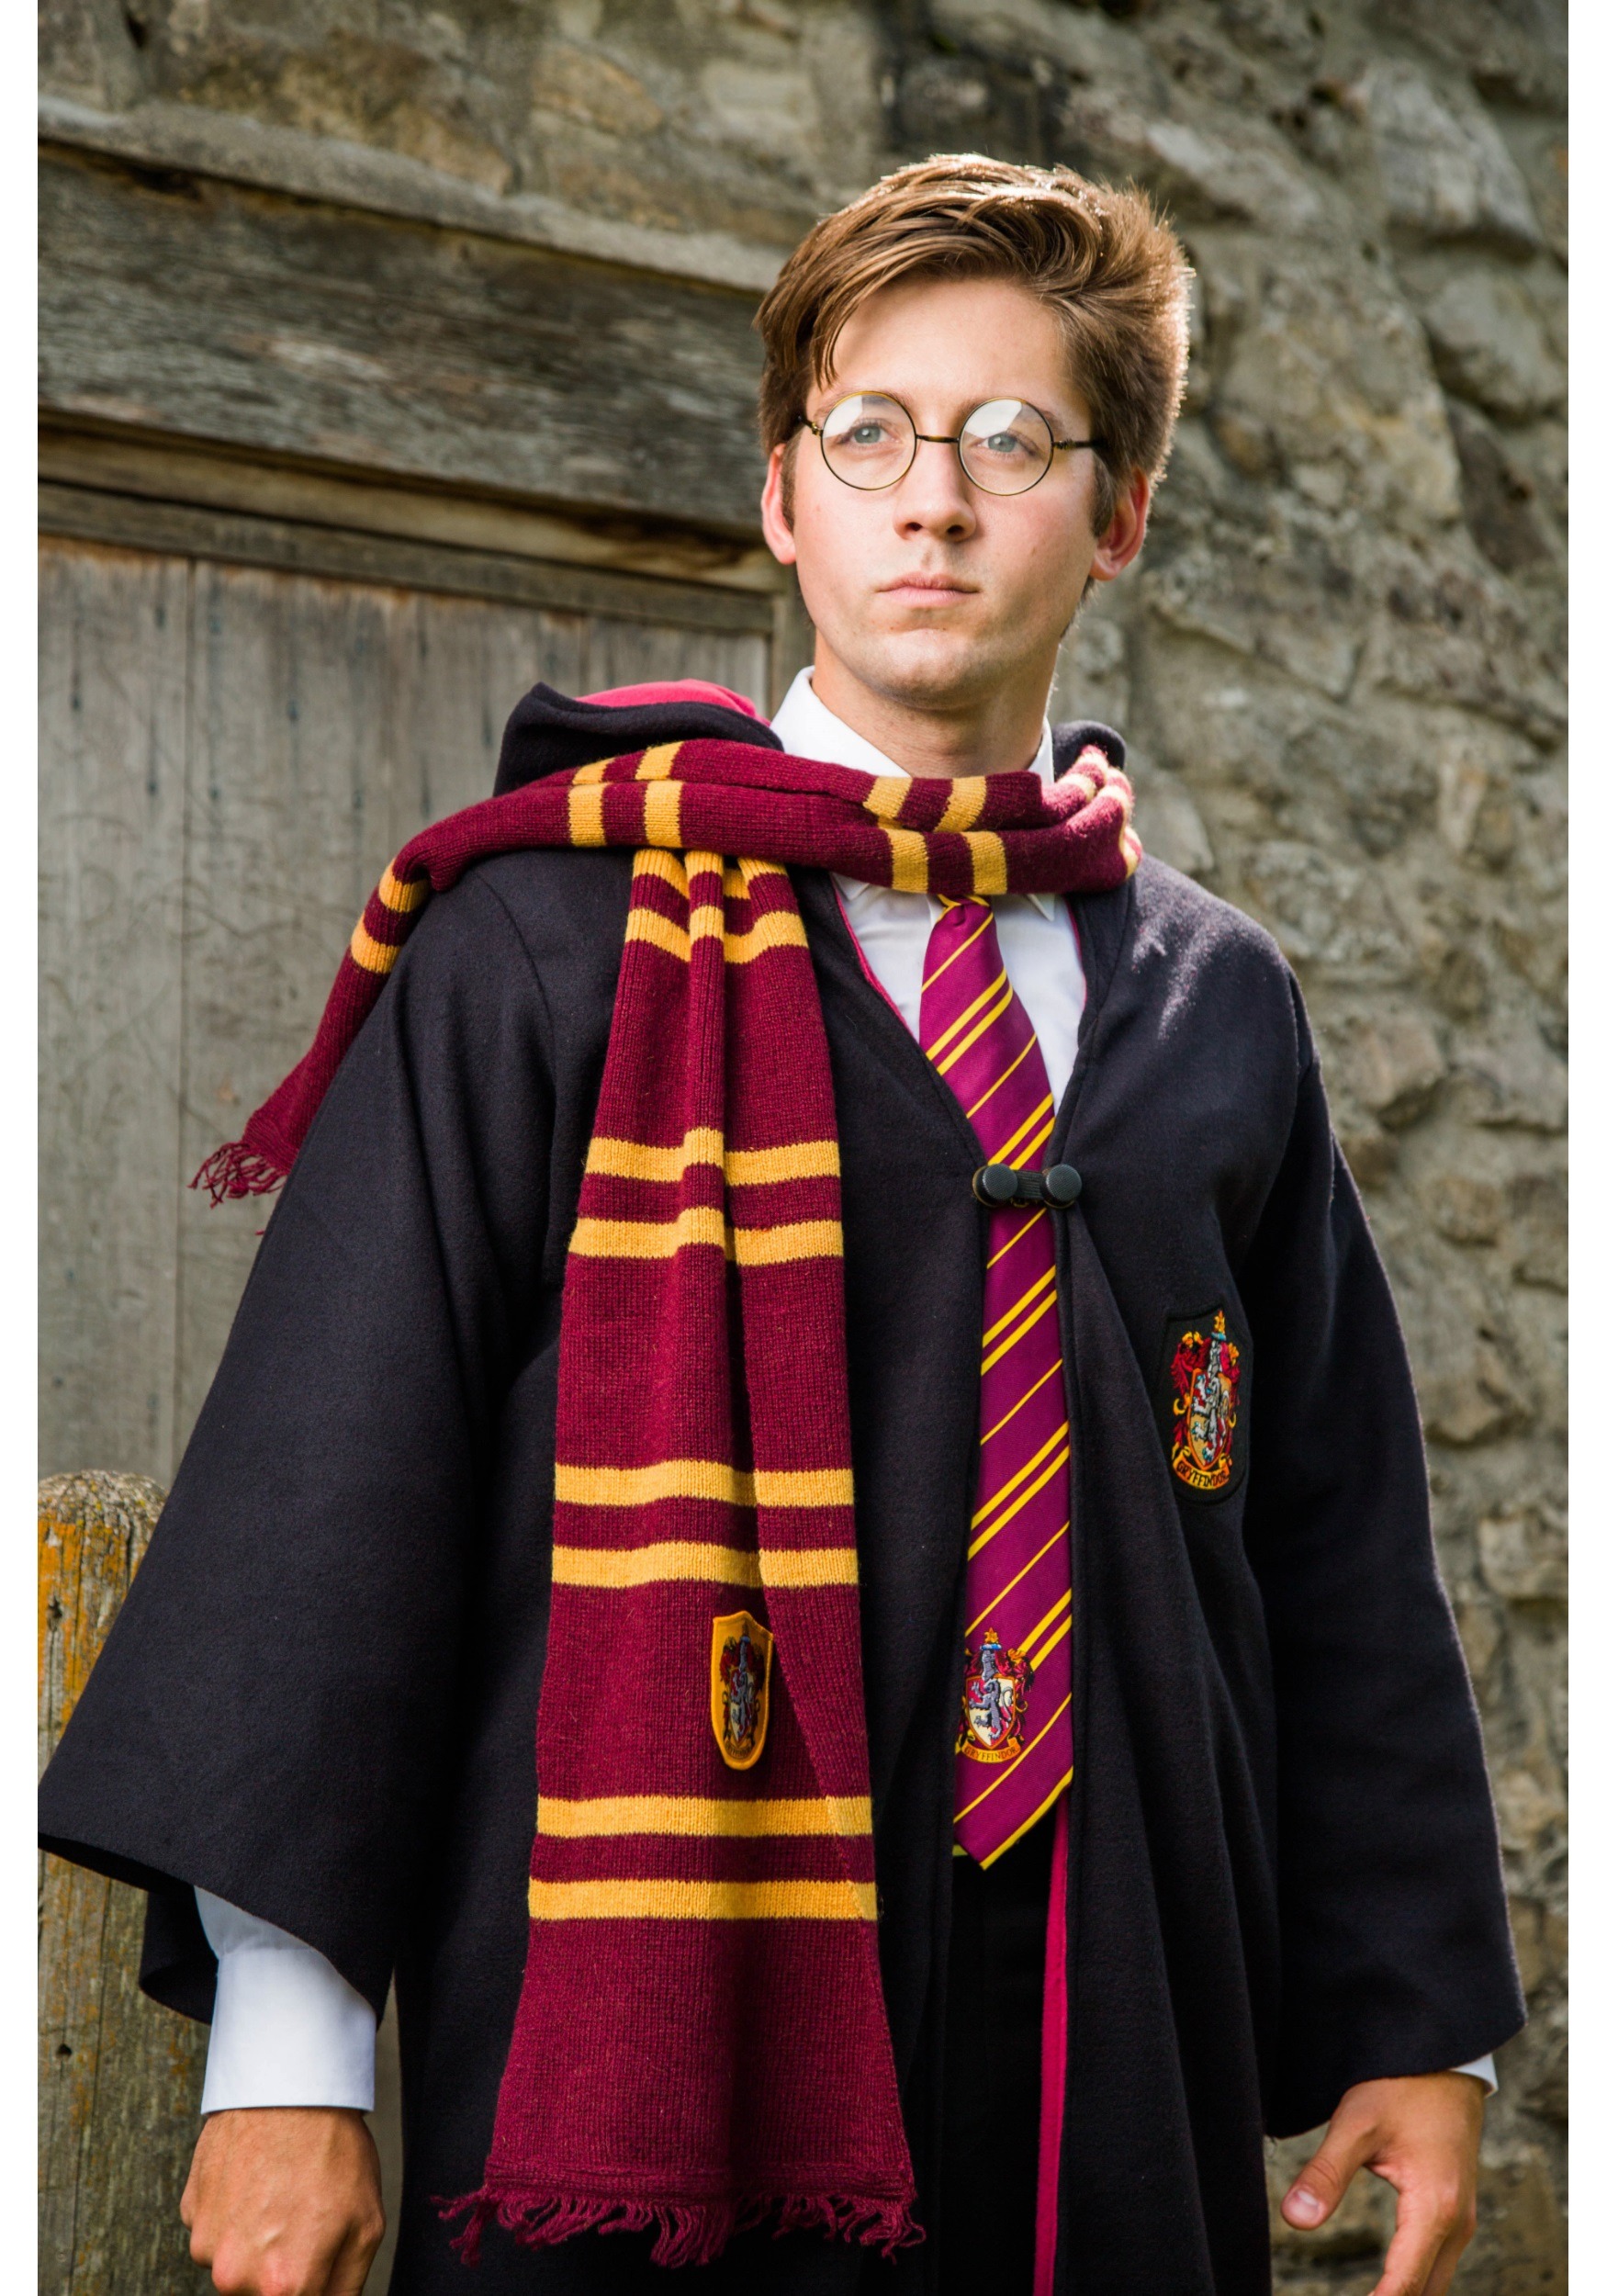 Harry Potter Gryffindor Deluxe Scarf Costume Accessory 82686390330,The knit...